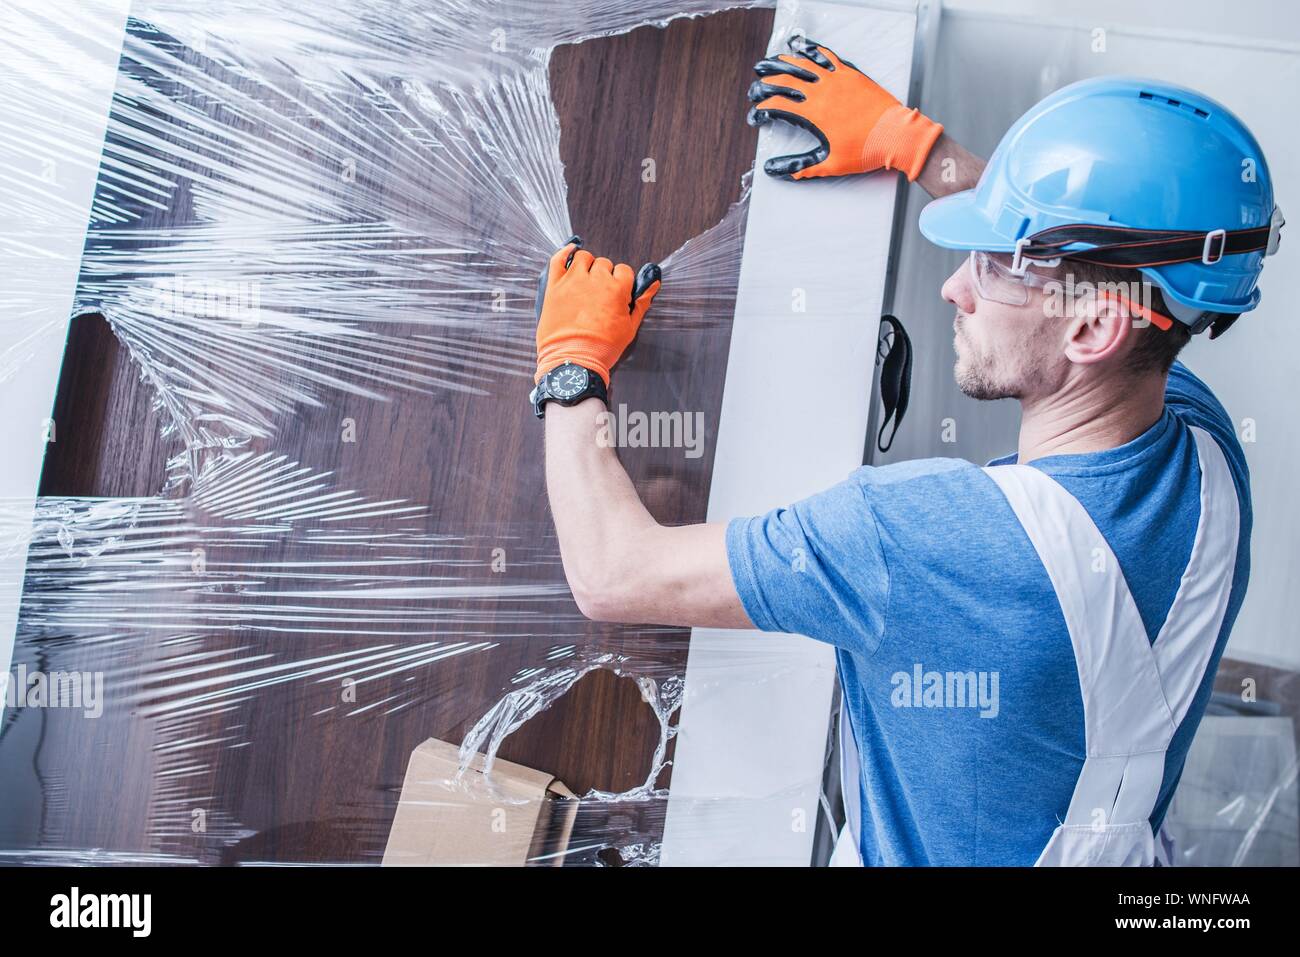 Manual Worker Removing Plastic From Door Stock Photo